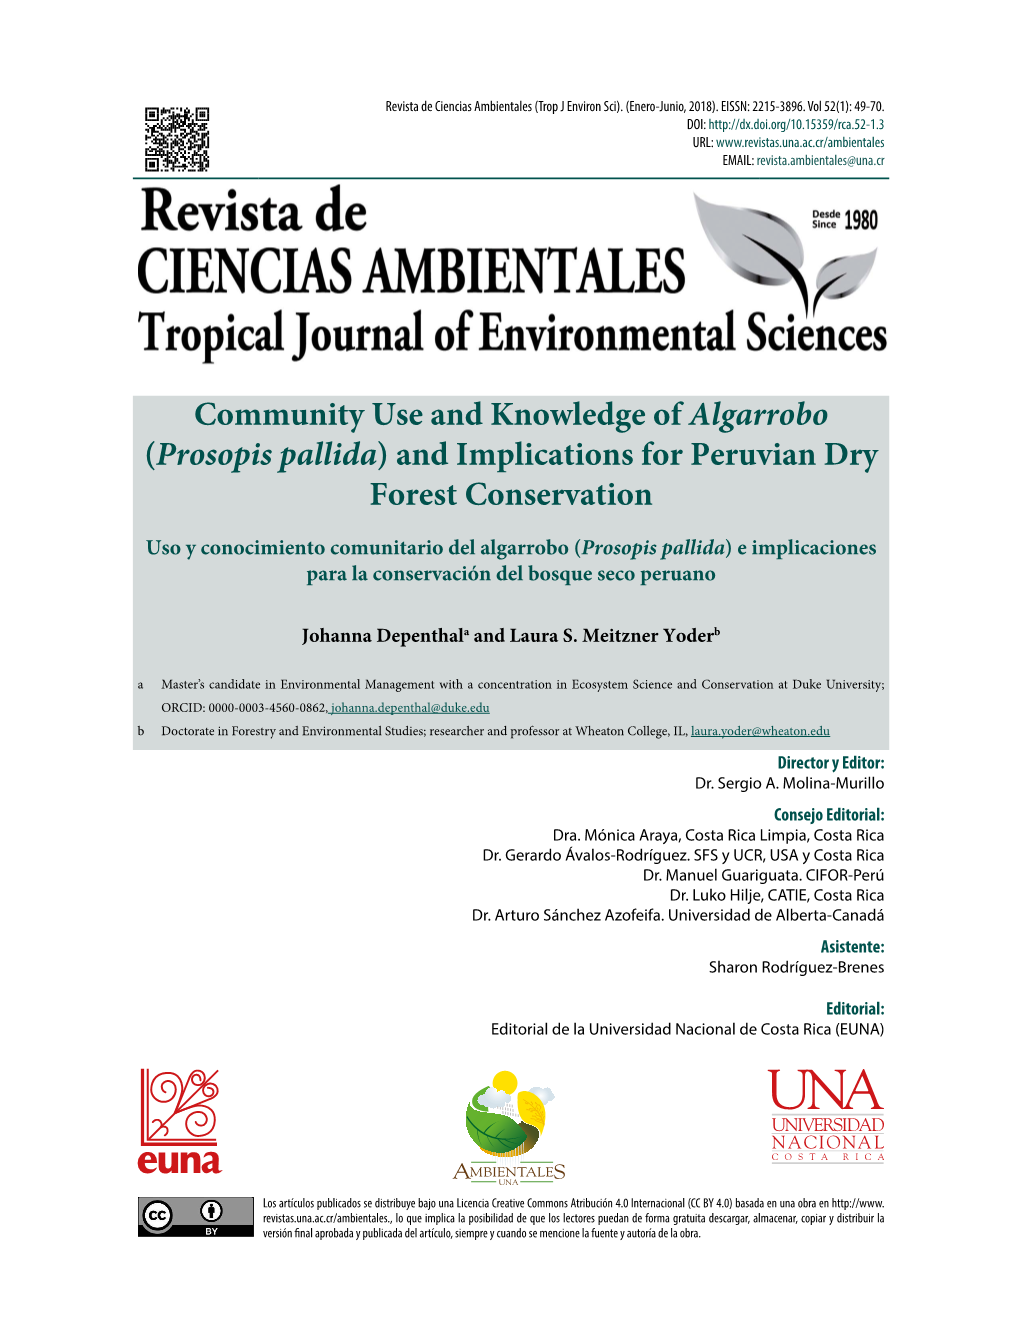 Prosopis Pallida) and Implications for Peruvian Dry Forest Conservation